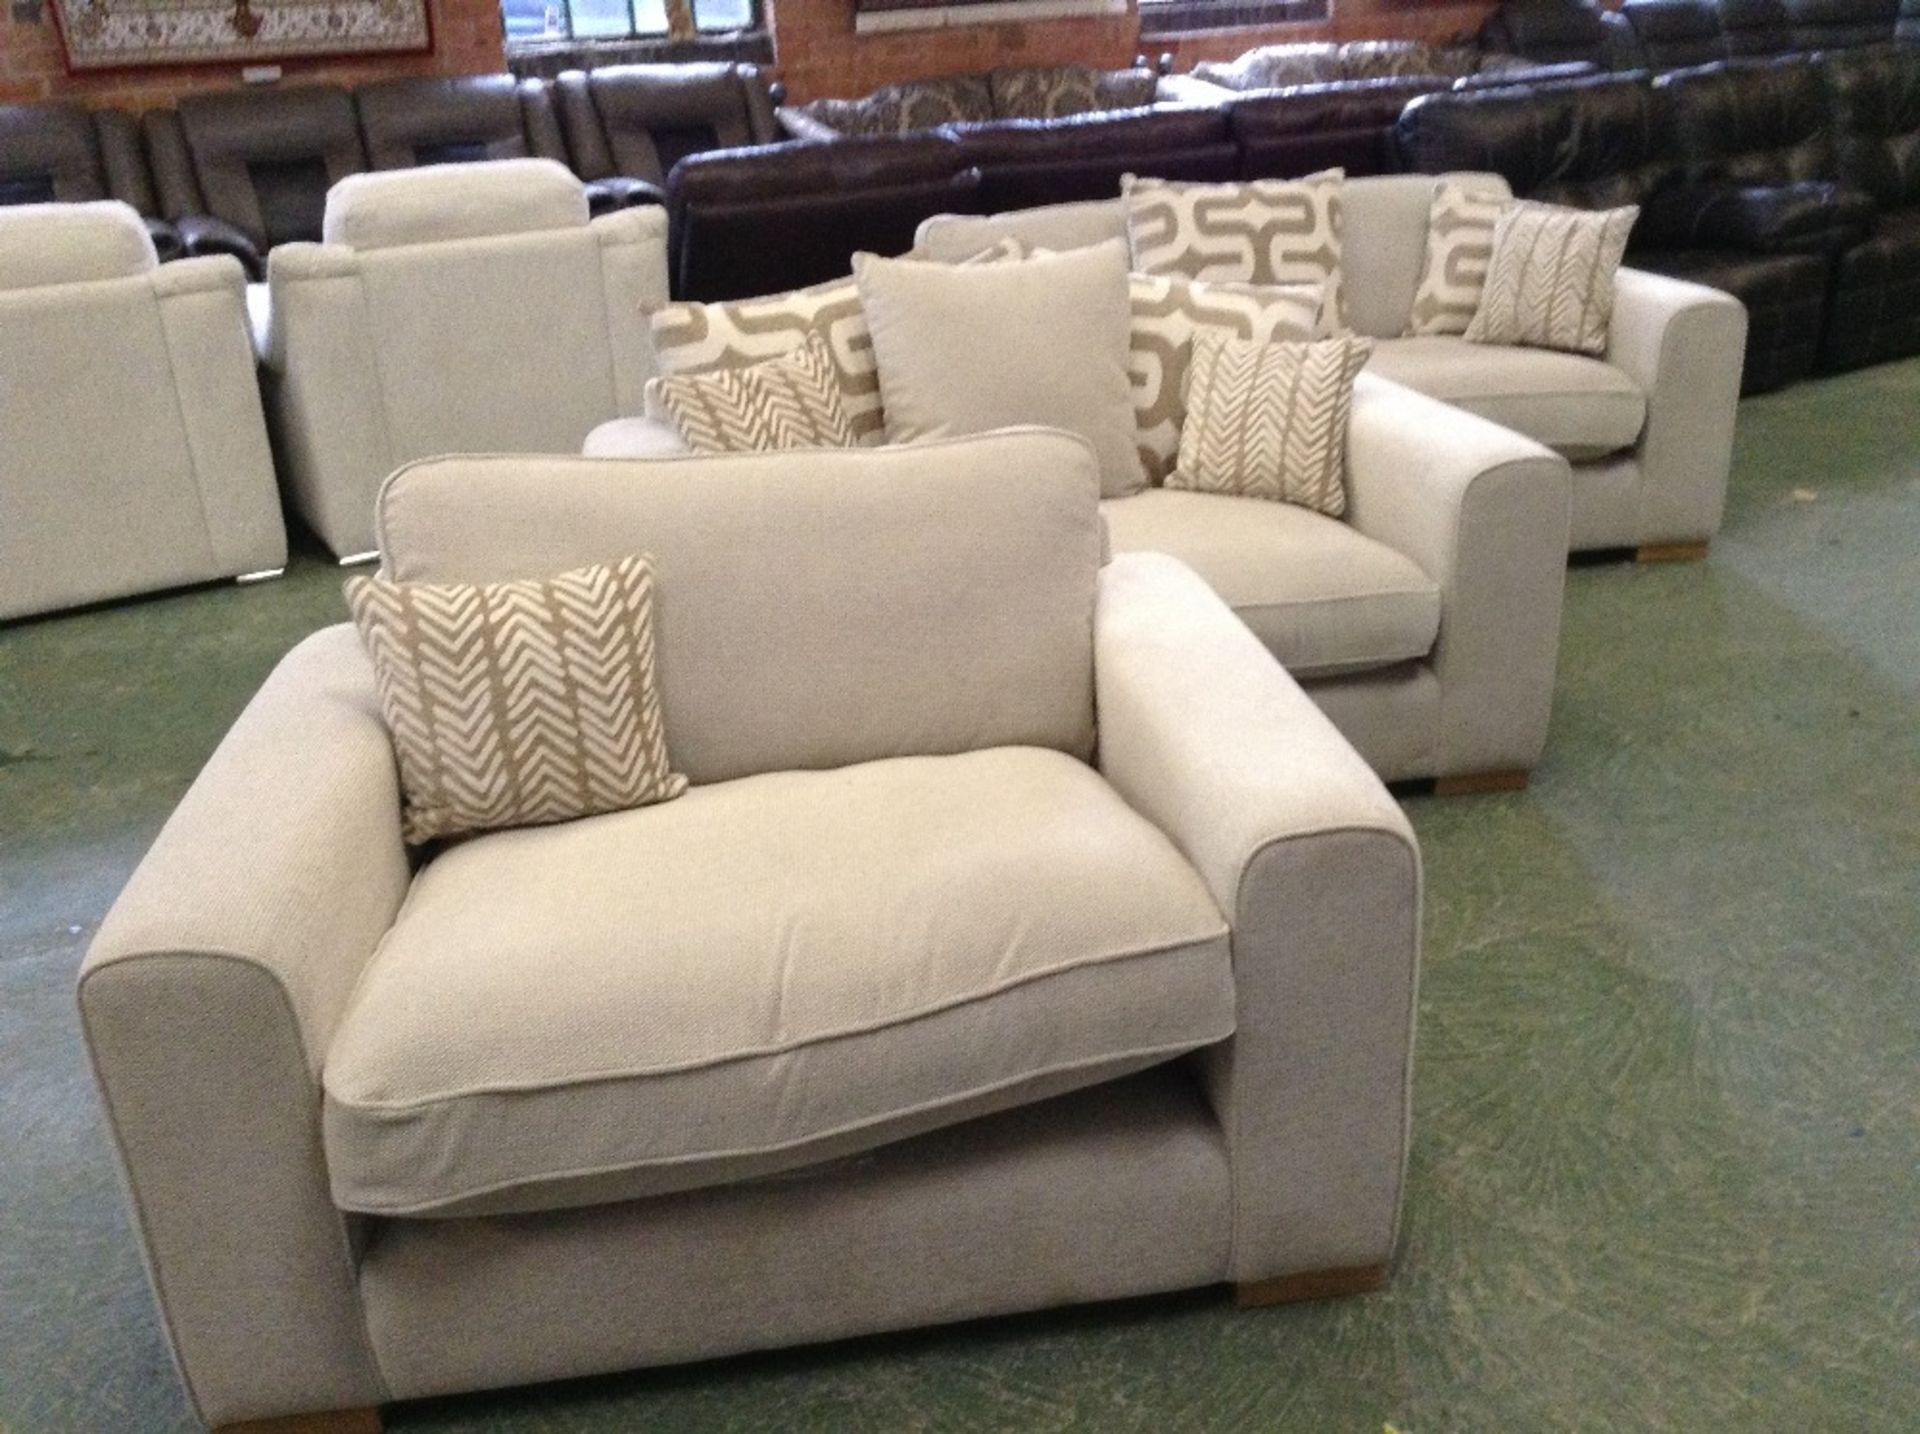 BISCUIT 3 SEATER SOFA, 2 SEATER SOFA AND CHAIR